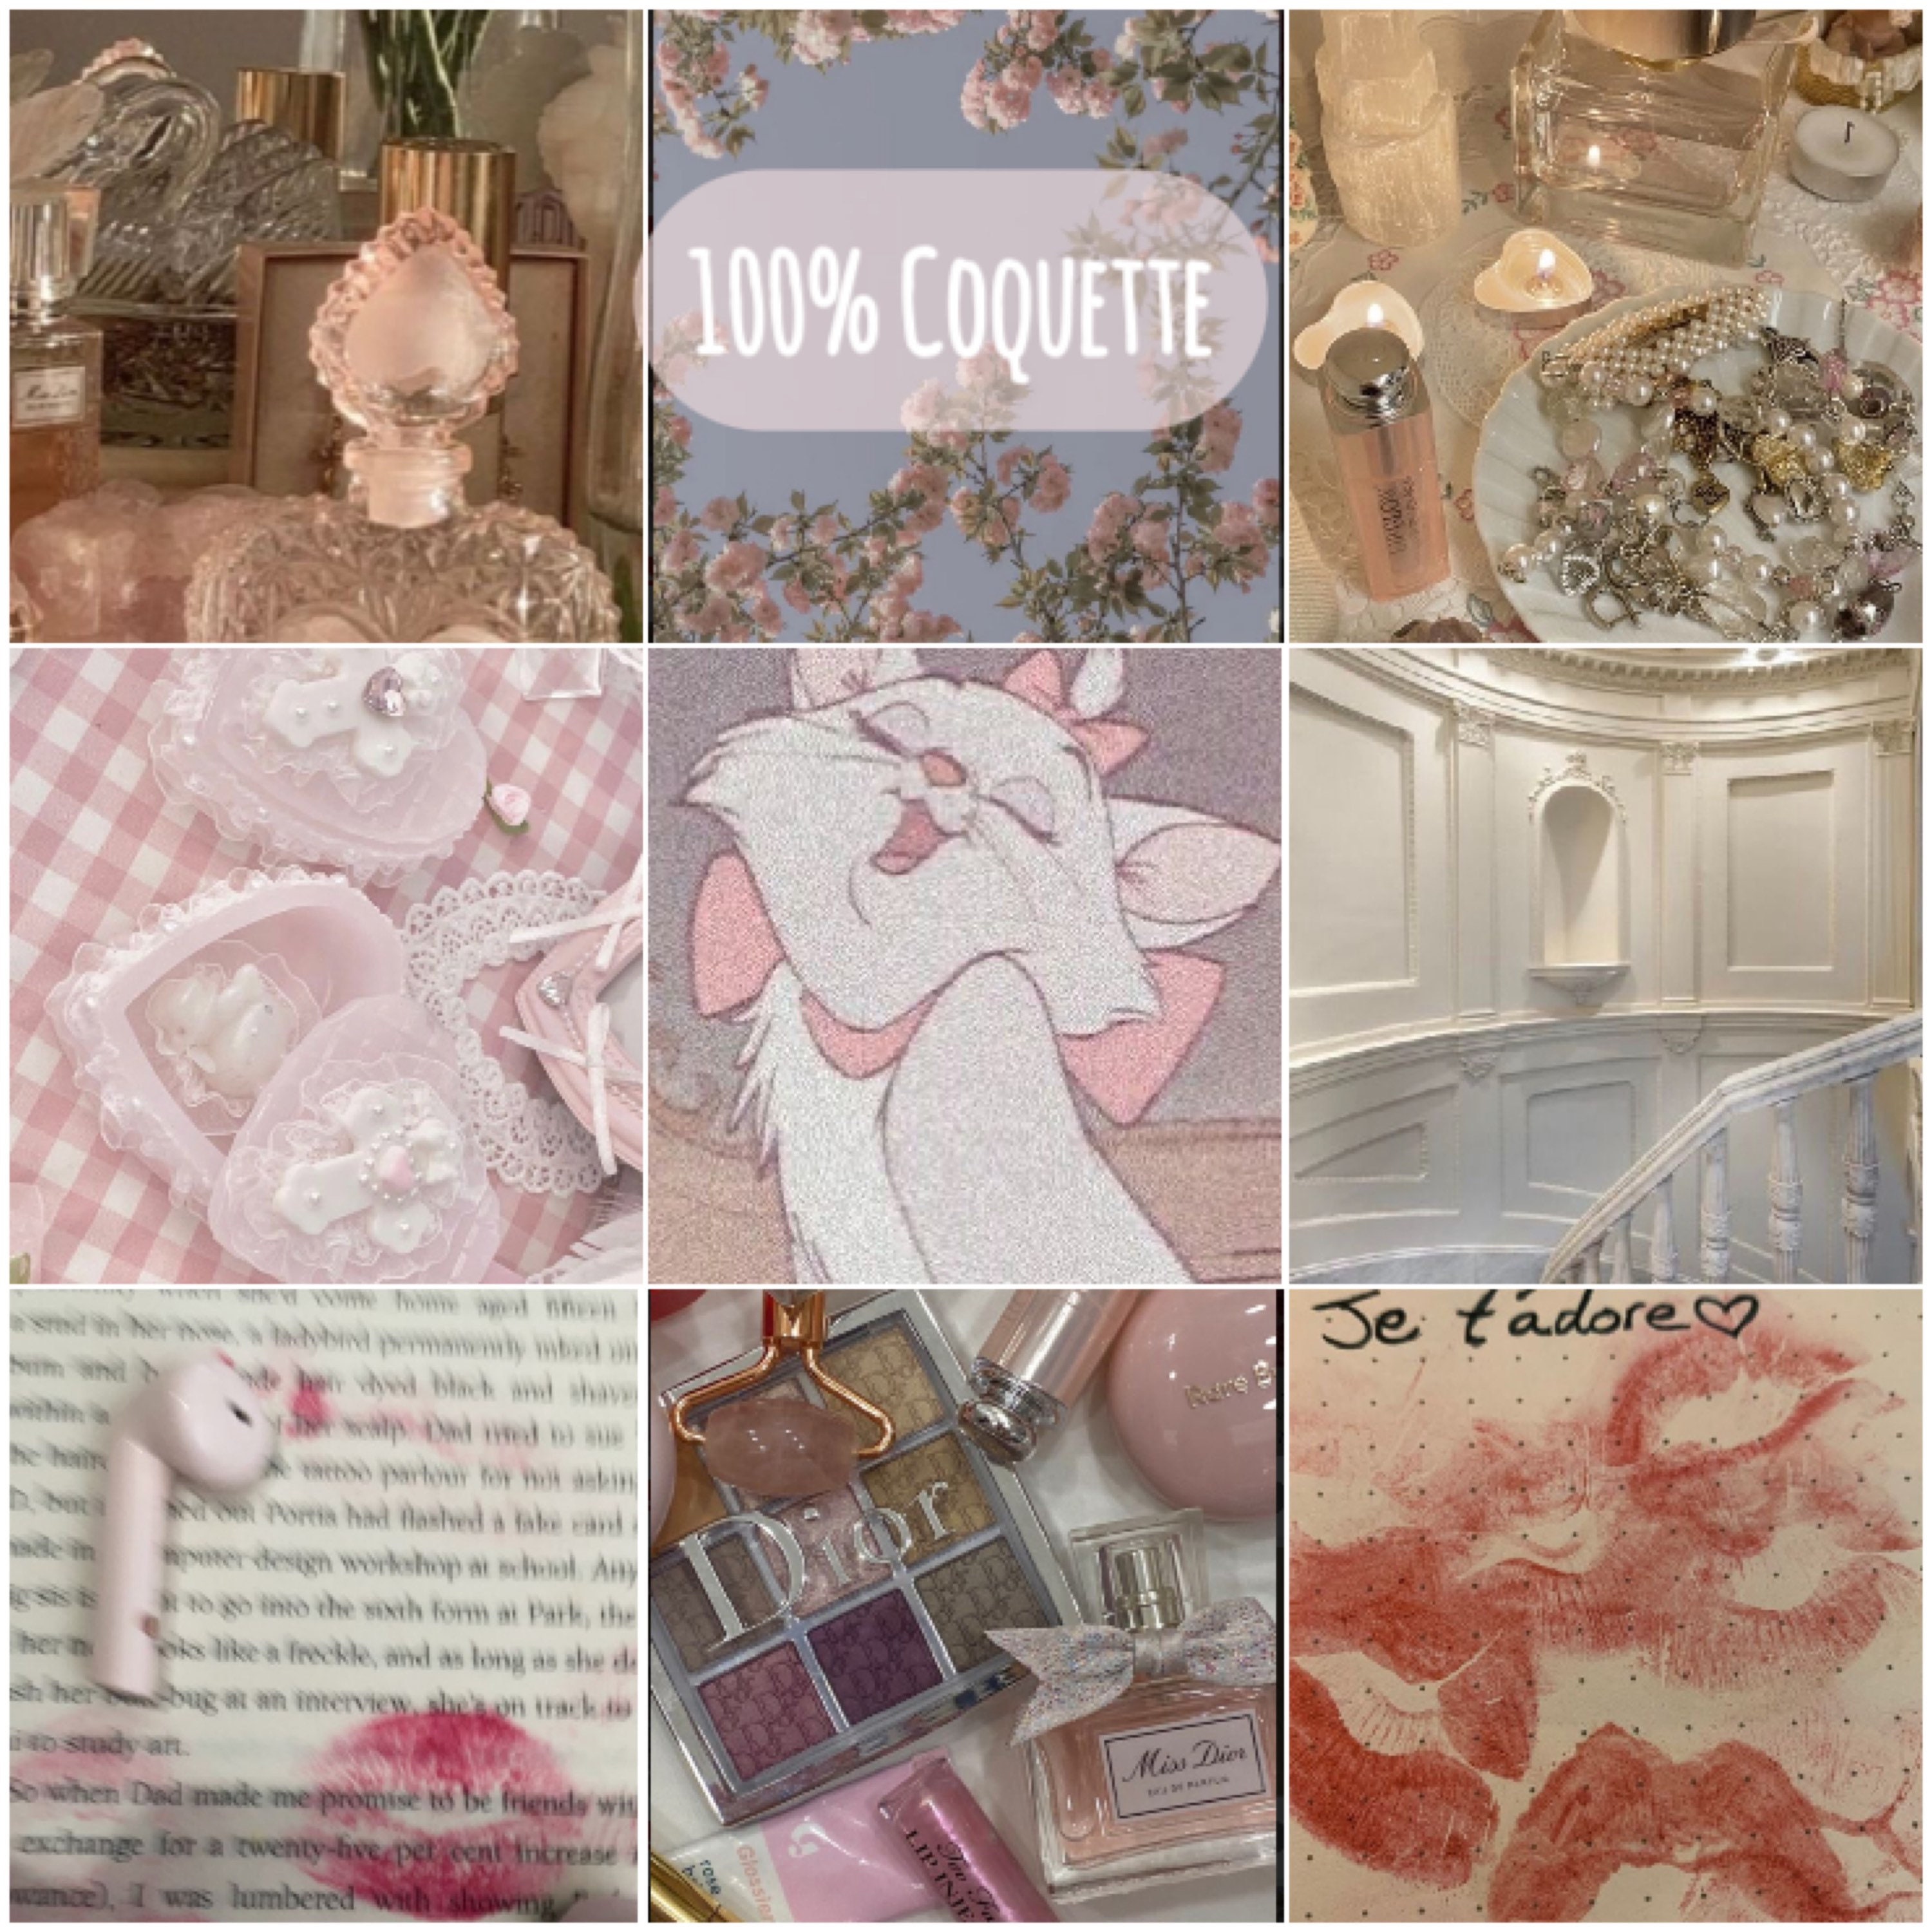 TwoDays Coquette Room Decor Aesthetic, Coquette Wall Argentina